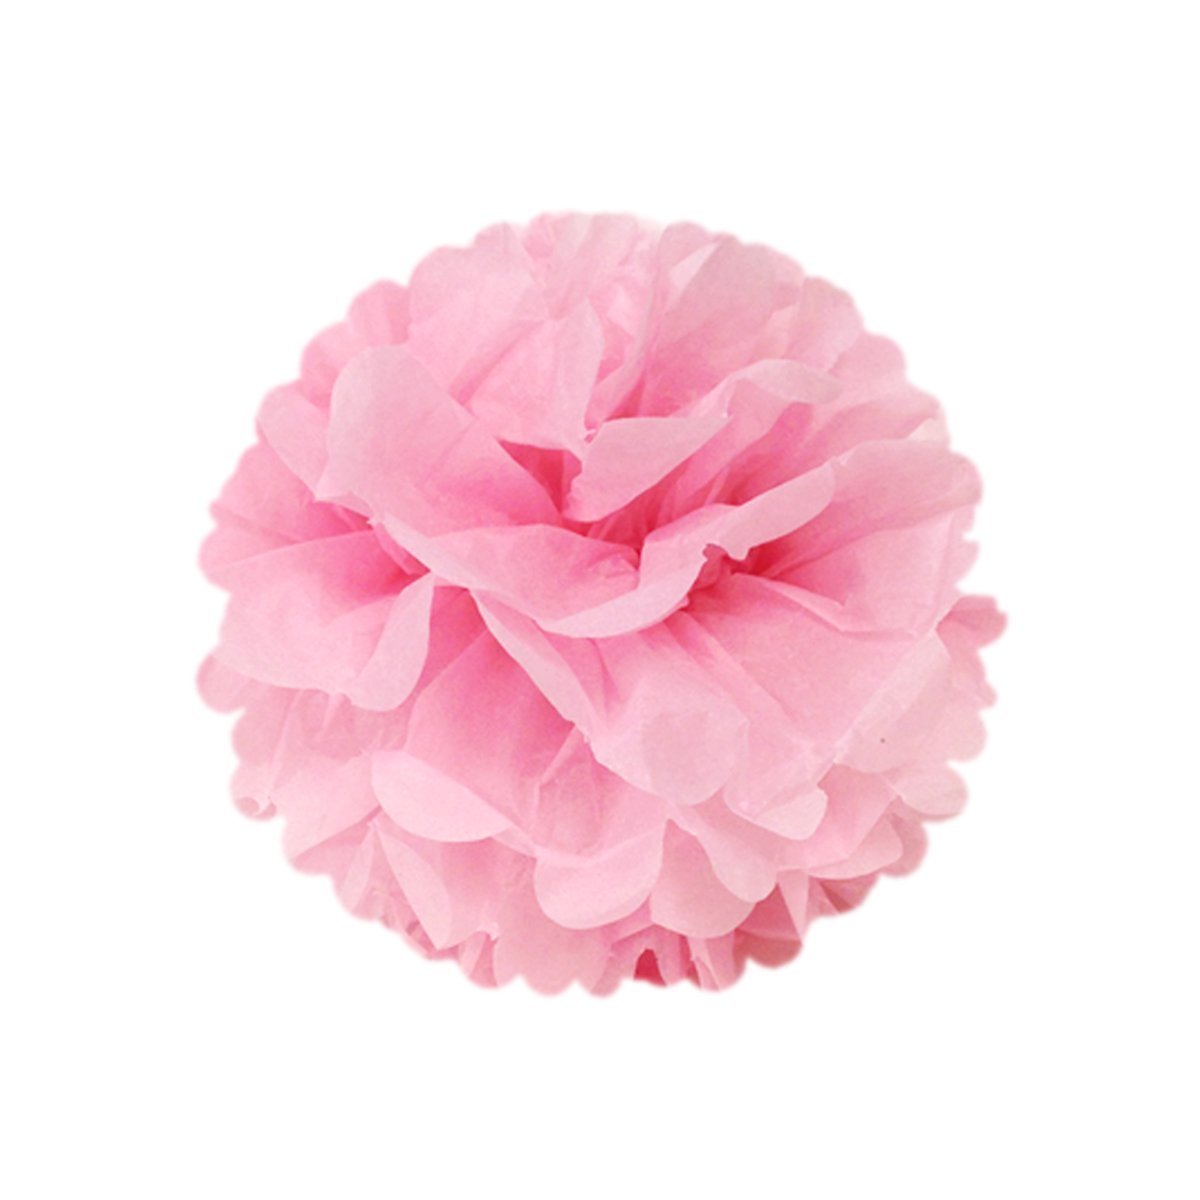 Wrapables Set of 21 Tissue Honeycomb Ball and Pom Pom Party Decorations, Pink/ Hot Pink/ White